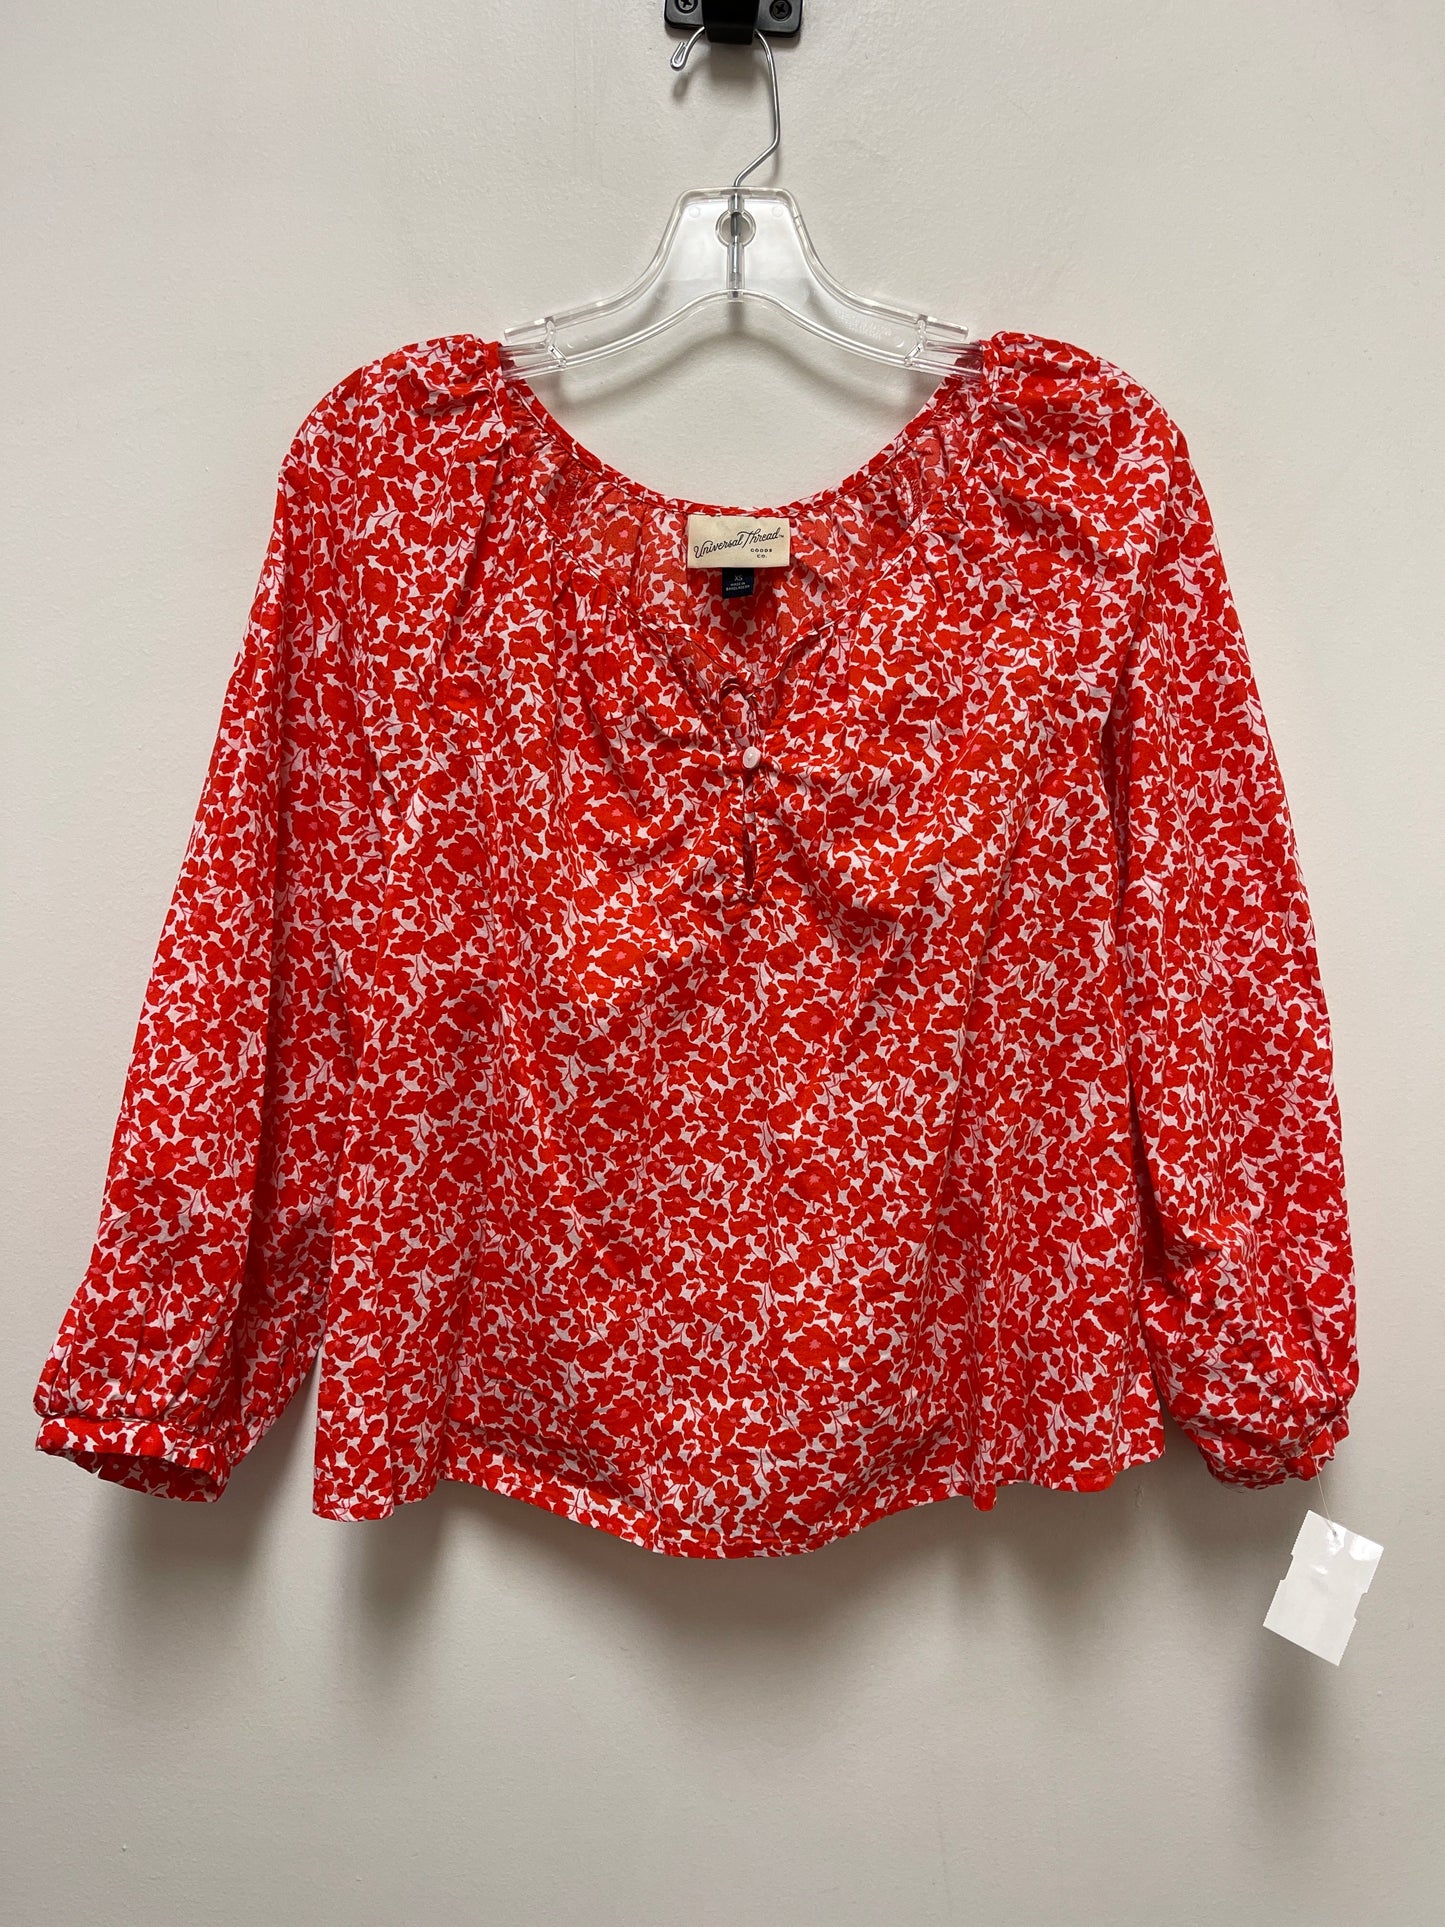 Red Top Long Sleeve Universal Thread, Size Xs